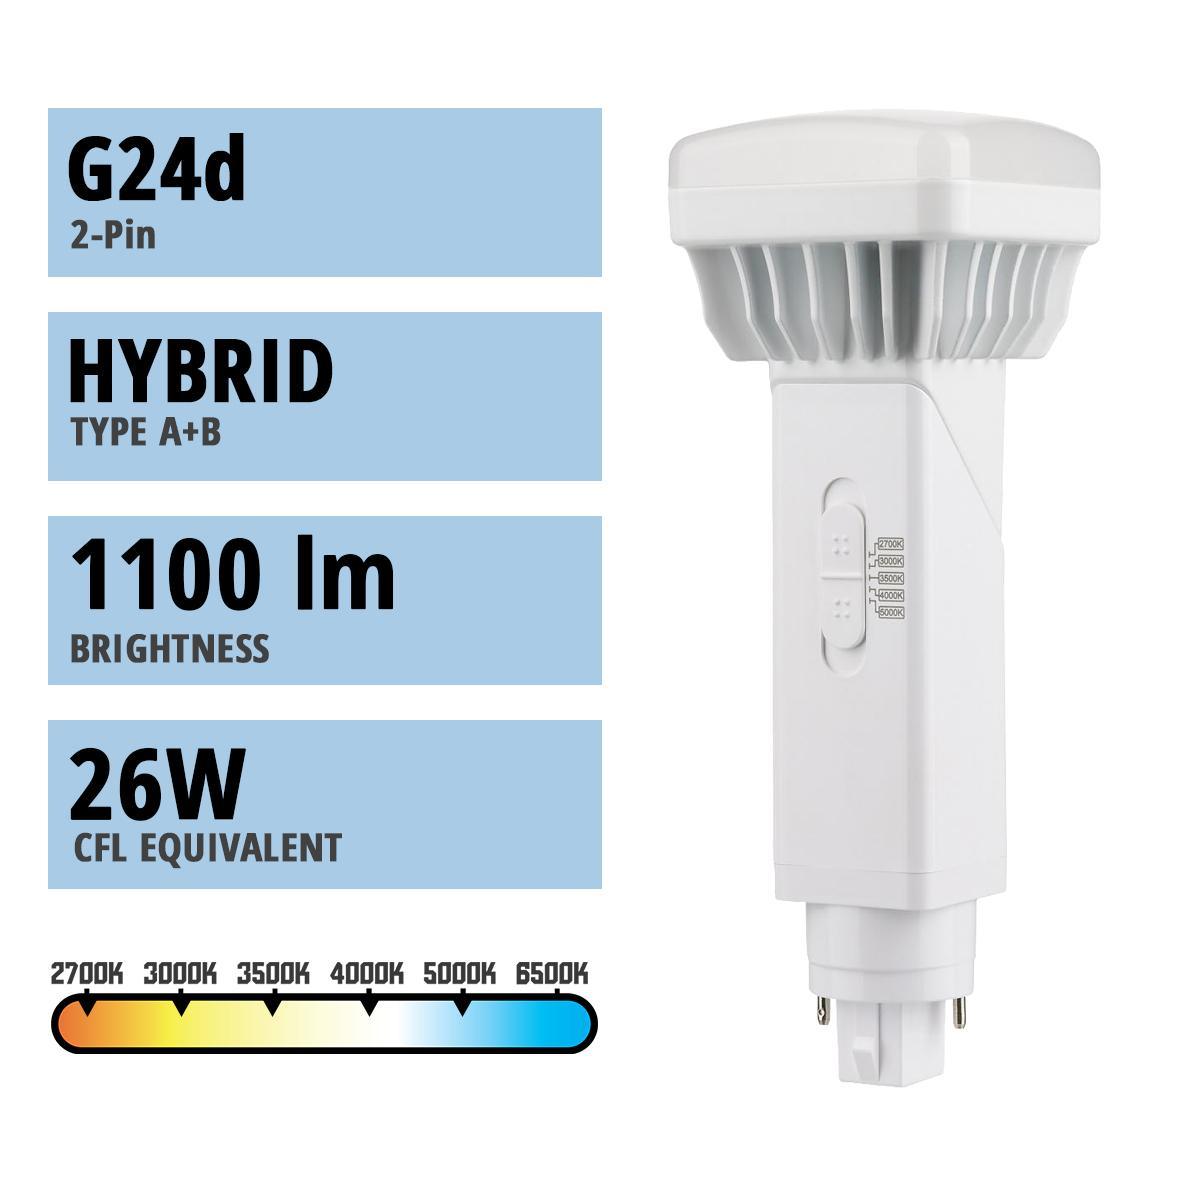 2 Pin PL LED Bulb, 9 Watt 1100 Lumens, Selectable CCT 2700K to 5000K, Universal, Replaces 26W CFL, G24d Base, Direct Or Bypass